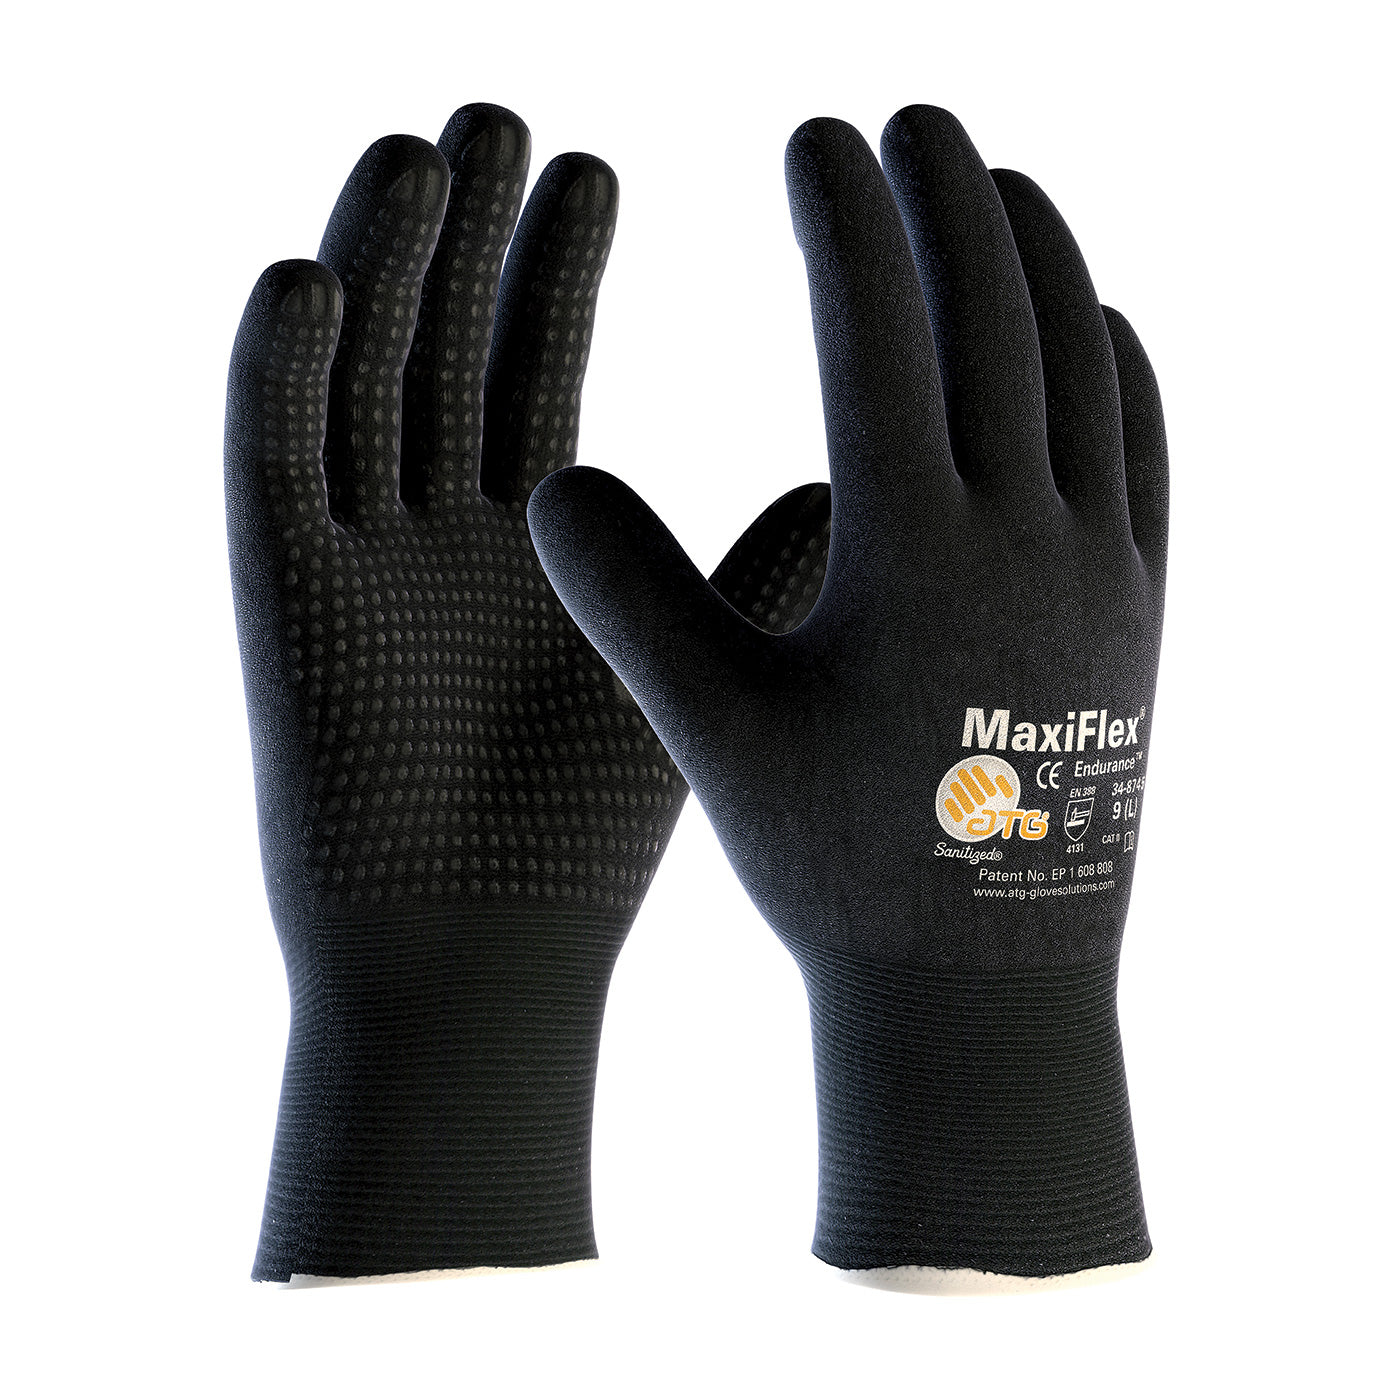 PIP 34-8745 MaxiFlex Endurance Seamless Knit Nylon/Lycra Gloves with Nitrile Coated on Full Hand - Micro Dot Palm (Pack of 12 Pairs)